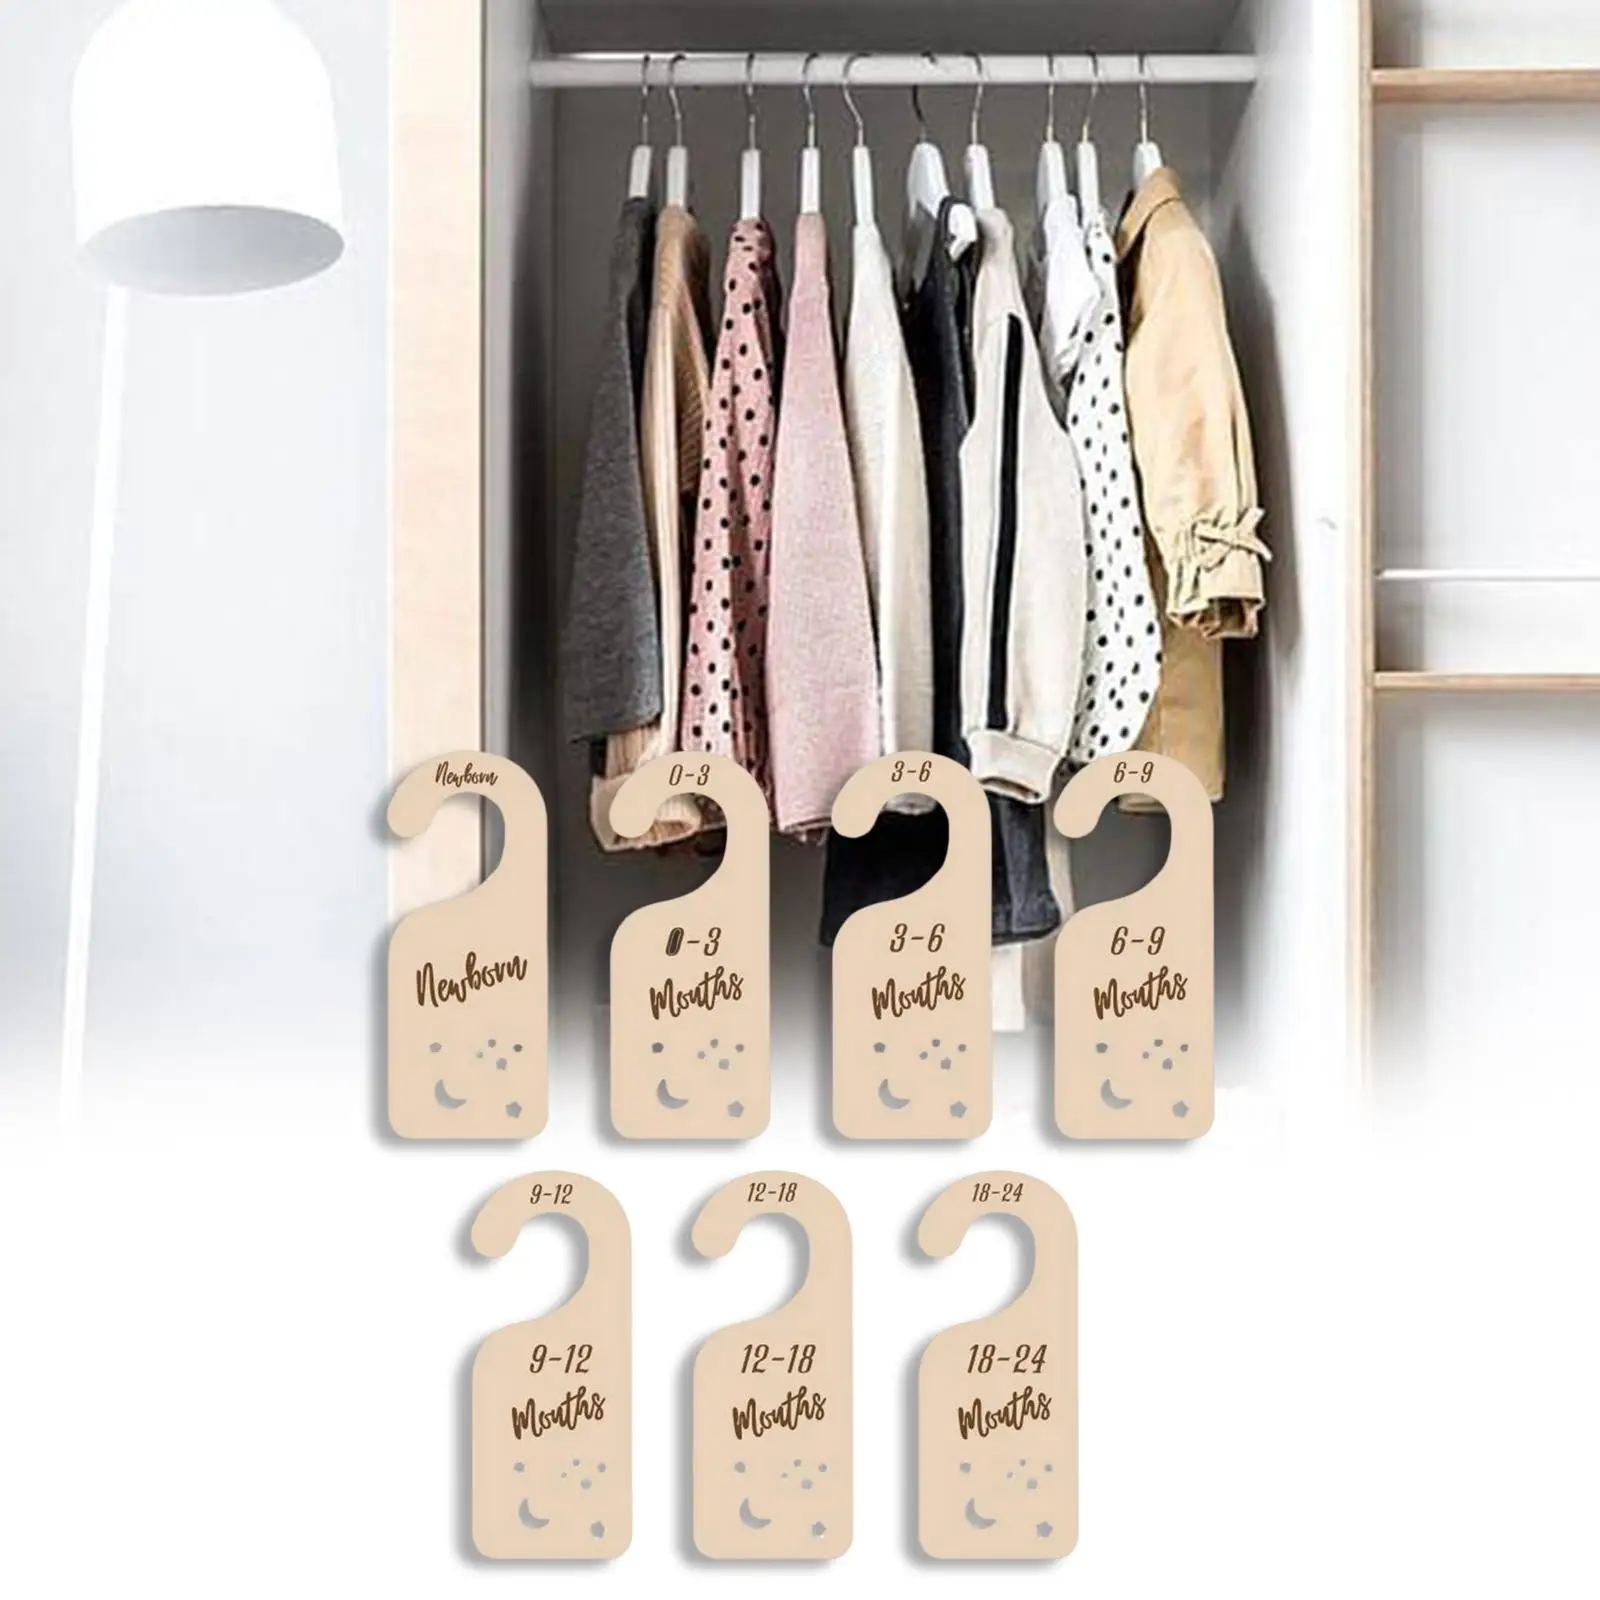 7x Closet Baby Size Dividers Nursery Clothes Organizers Hanging Clothes Dividers for Photography Props